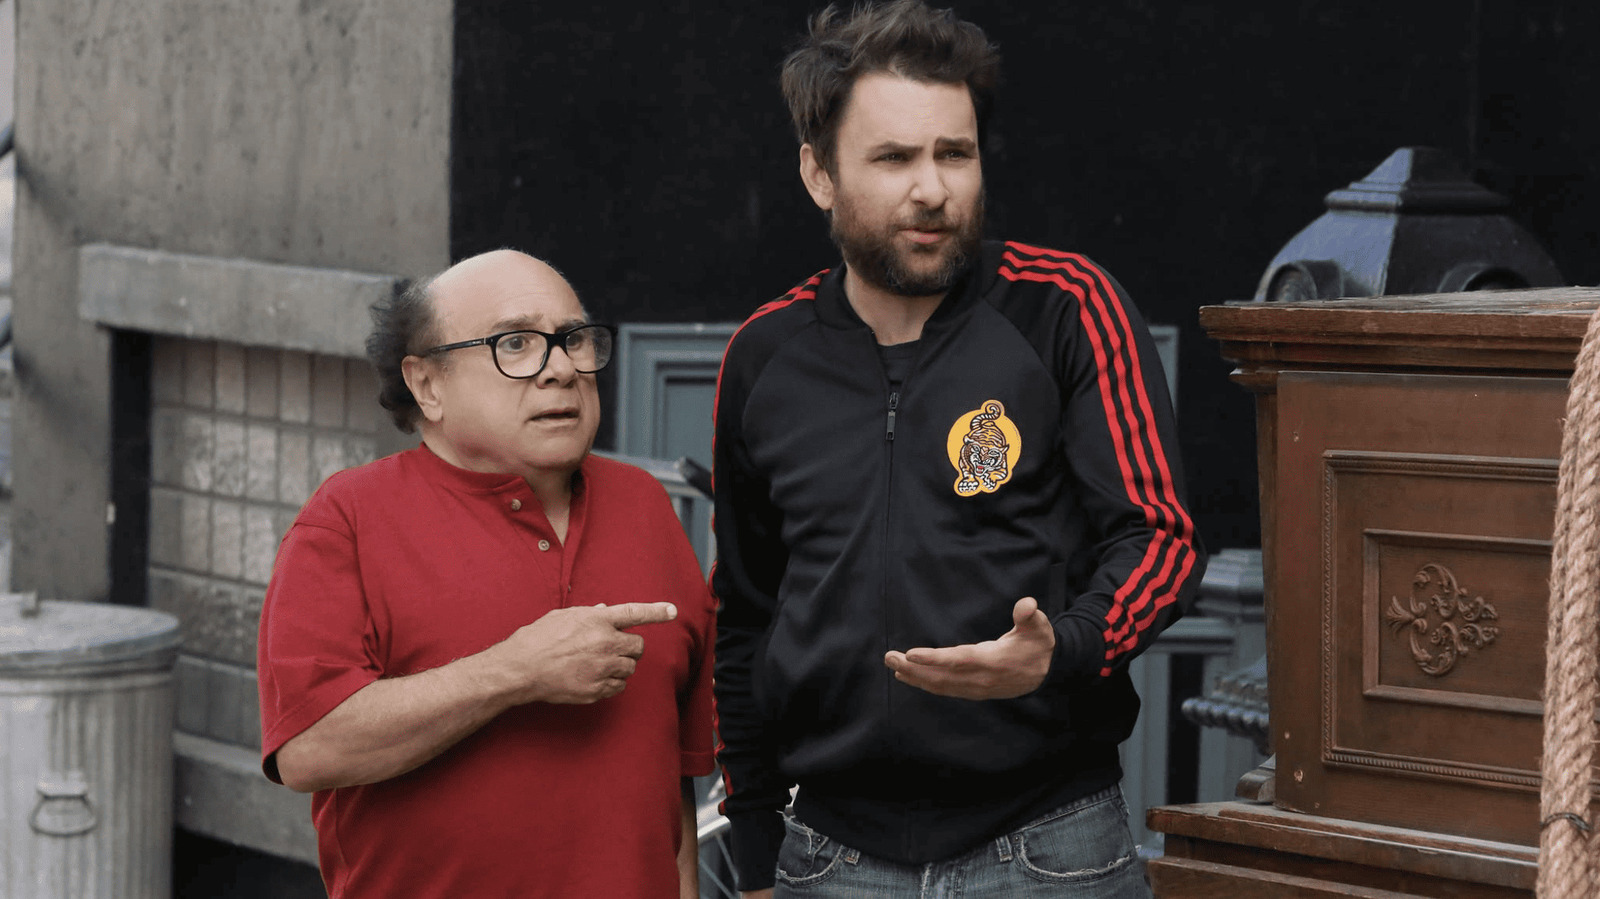 The It's Always Sunny In Philadelphia Moment That Defined Frank For Danny DeVito